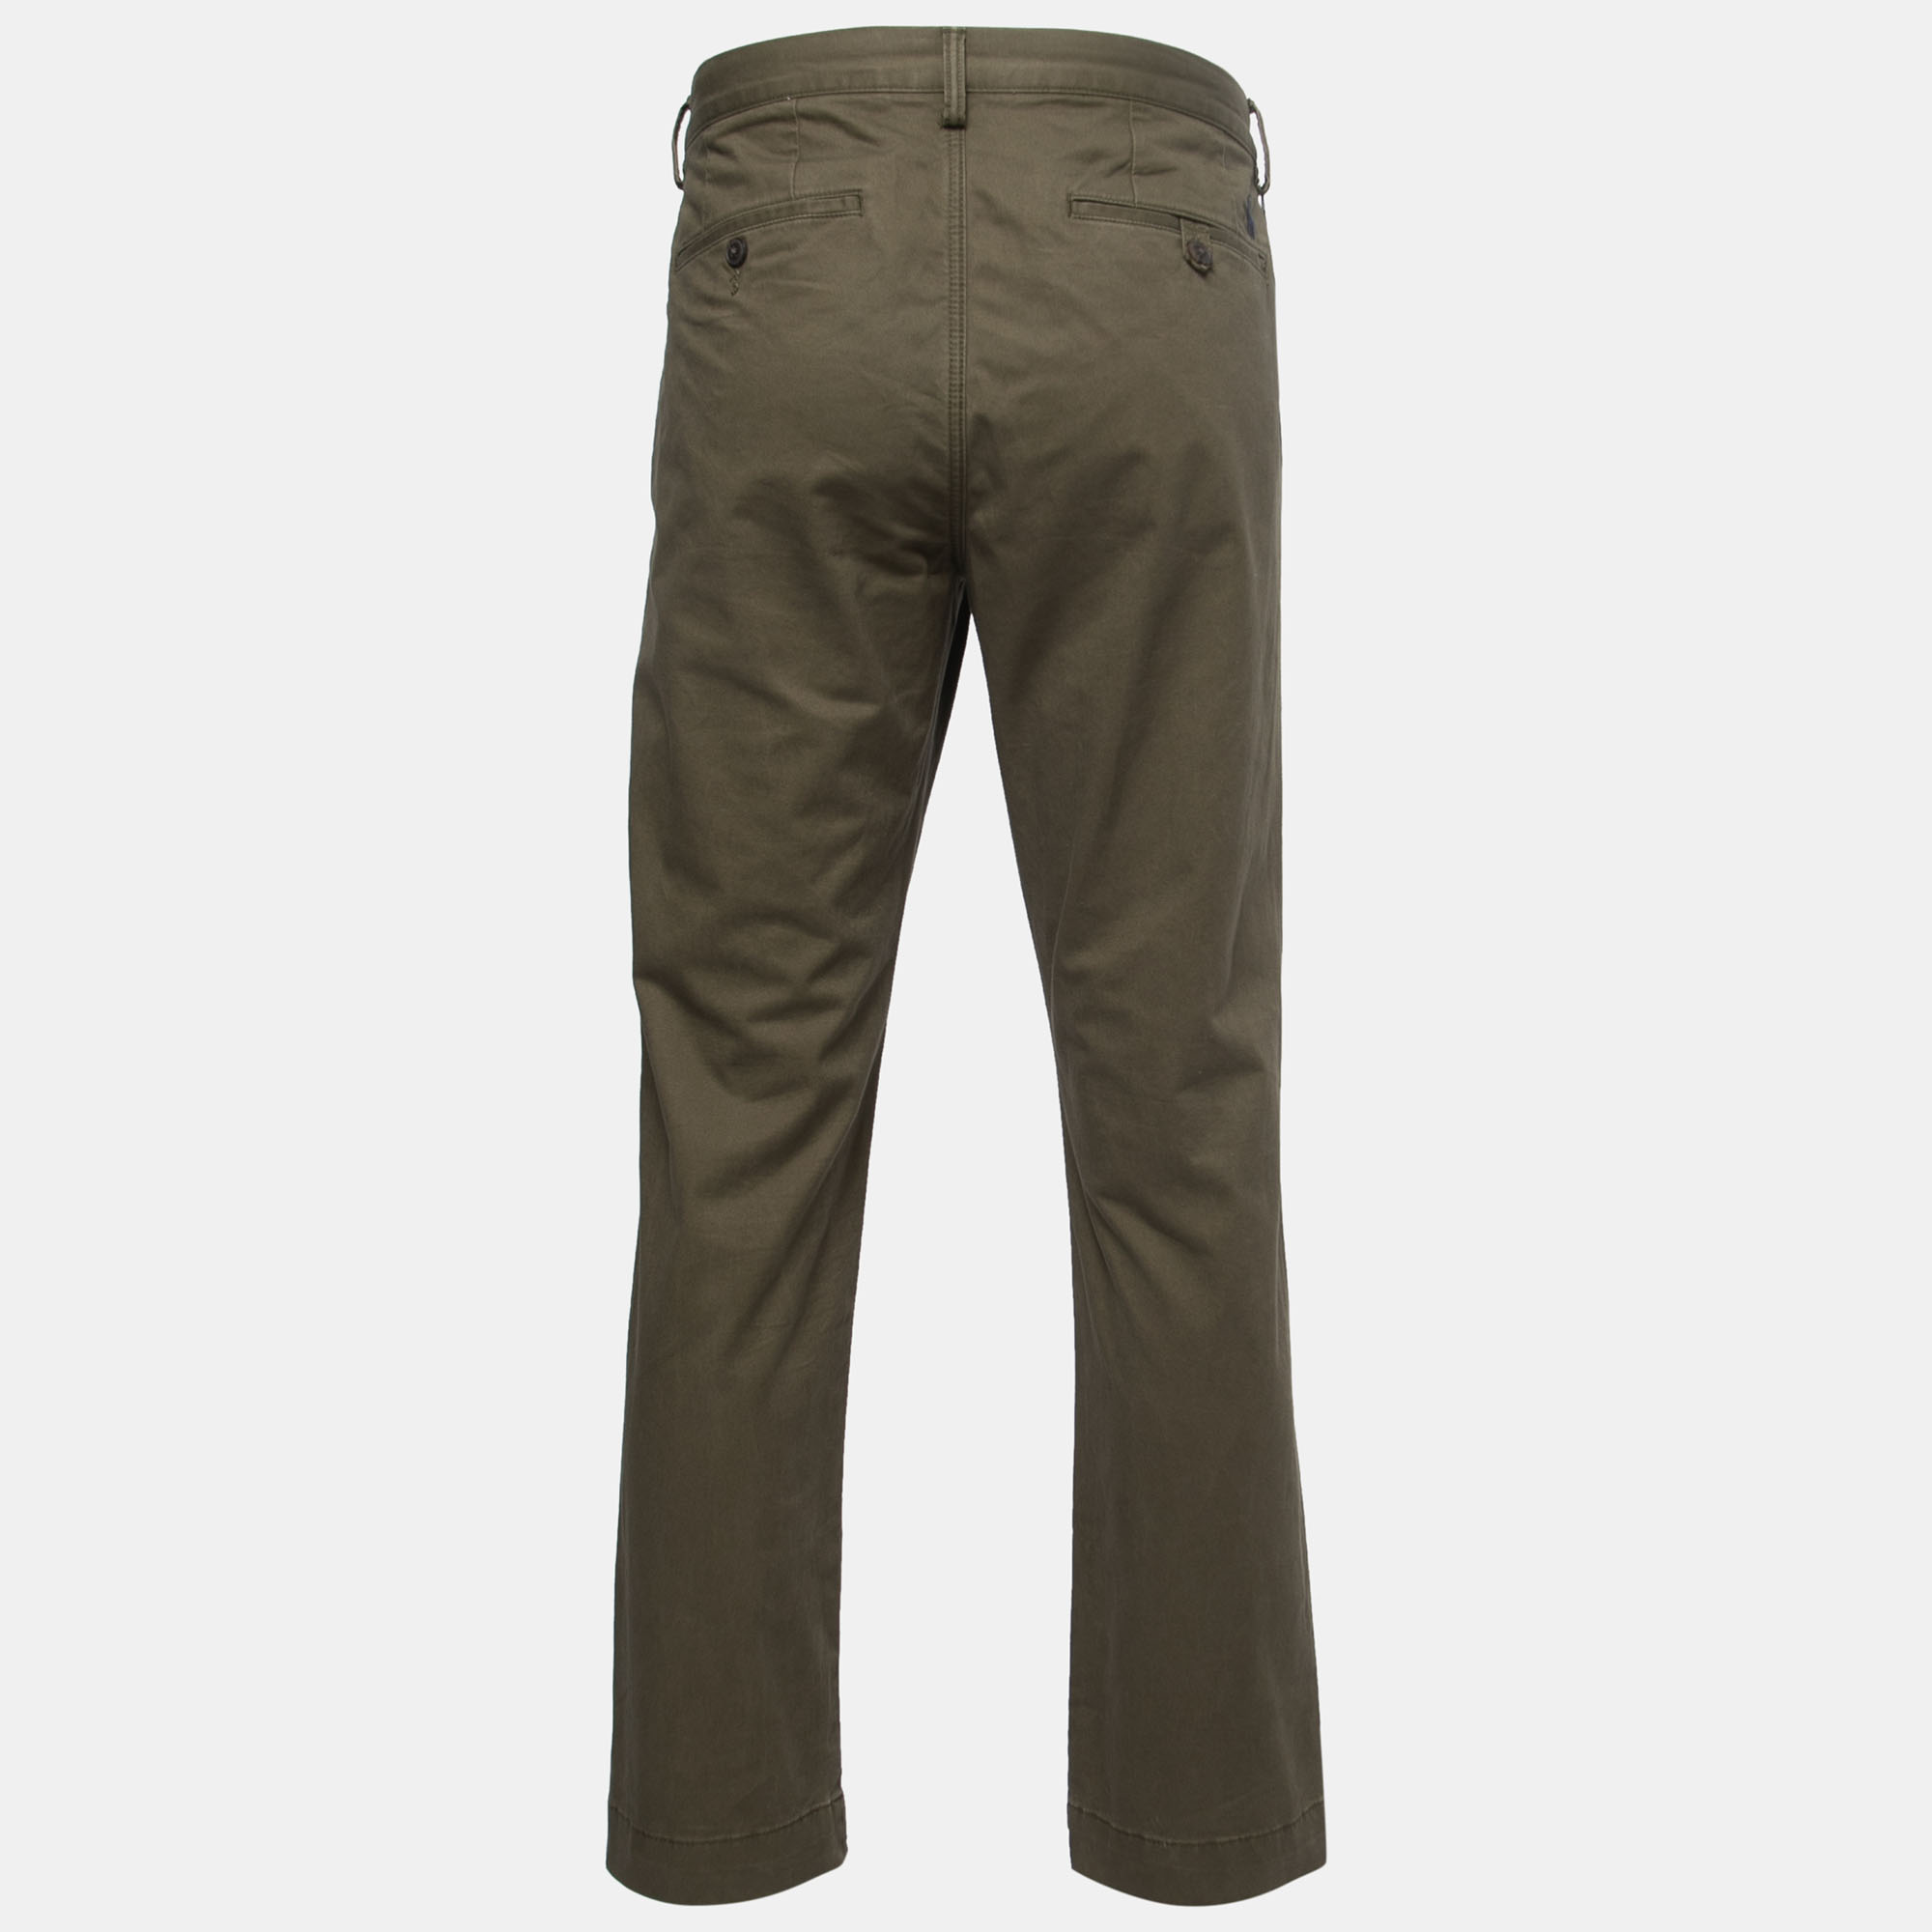 Pants Polo Ralph Lauren Green Cotton Twill Straight Fit Trousers L